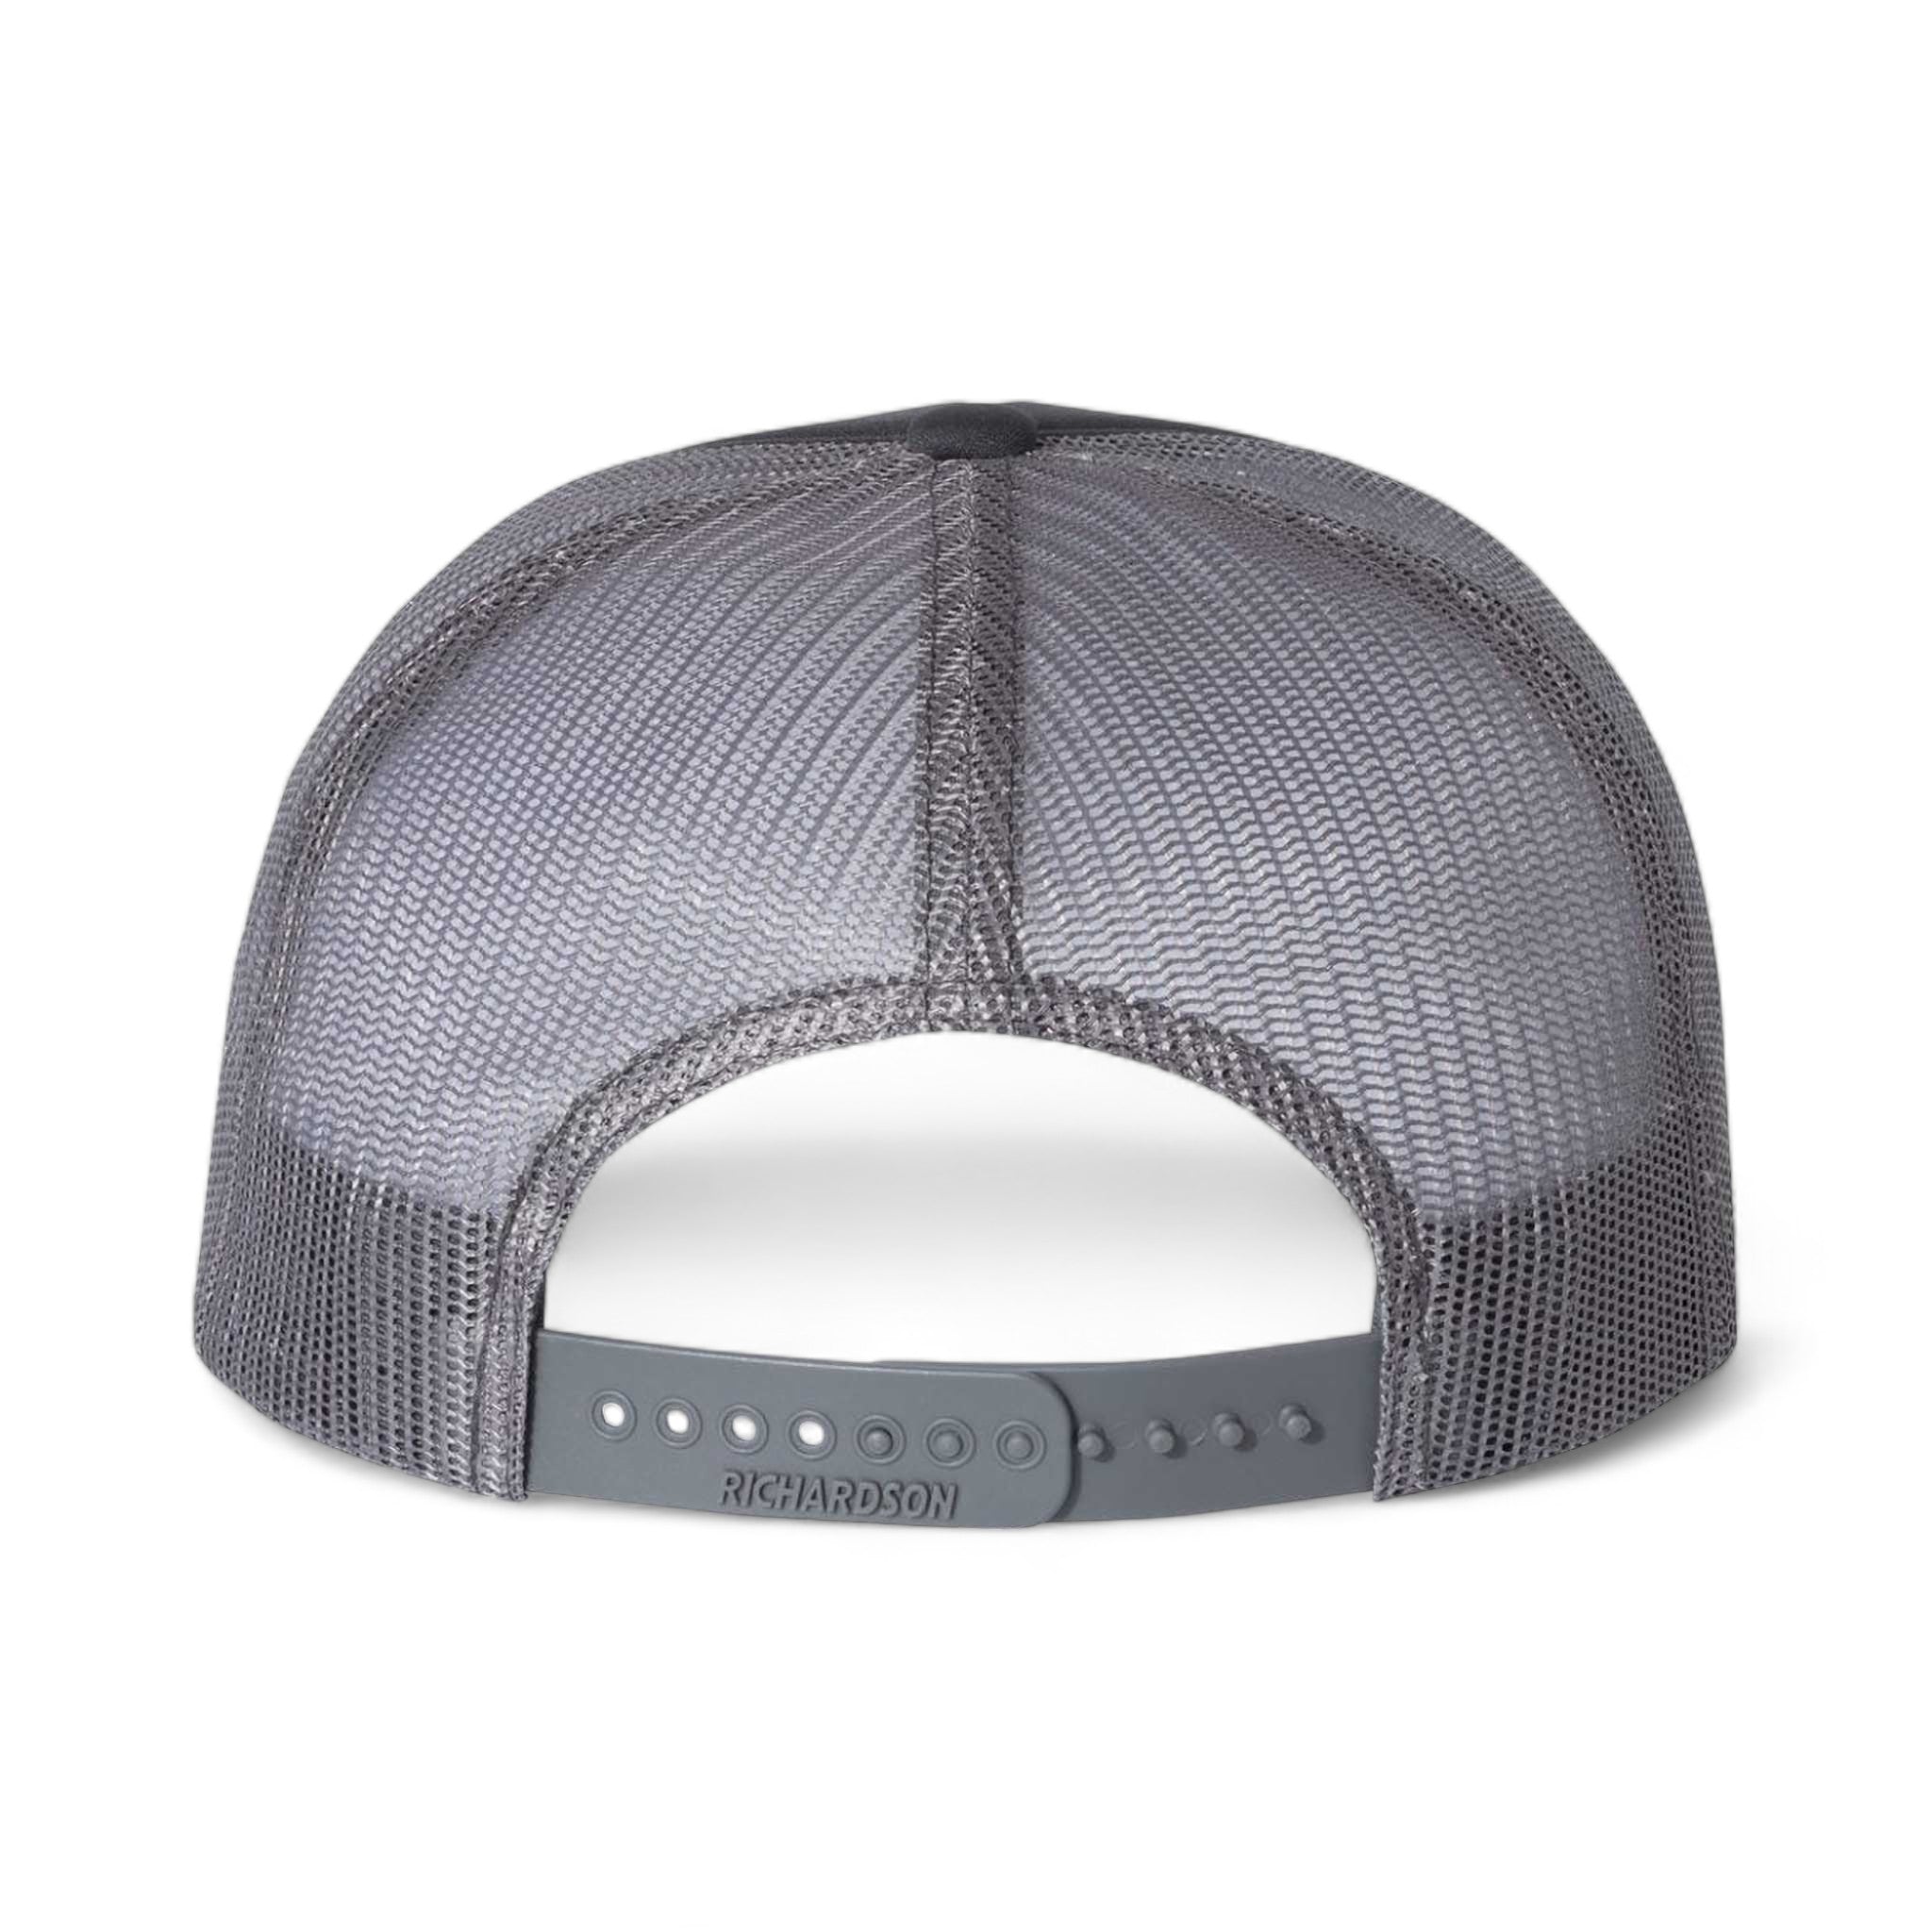 Back view of Richardson 113 custom hat in charcoal